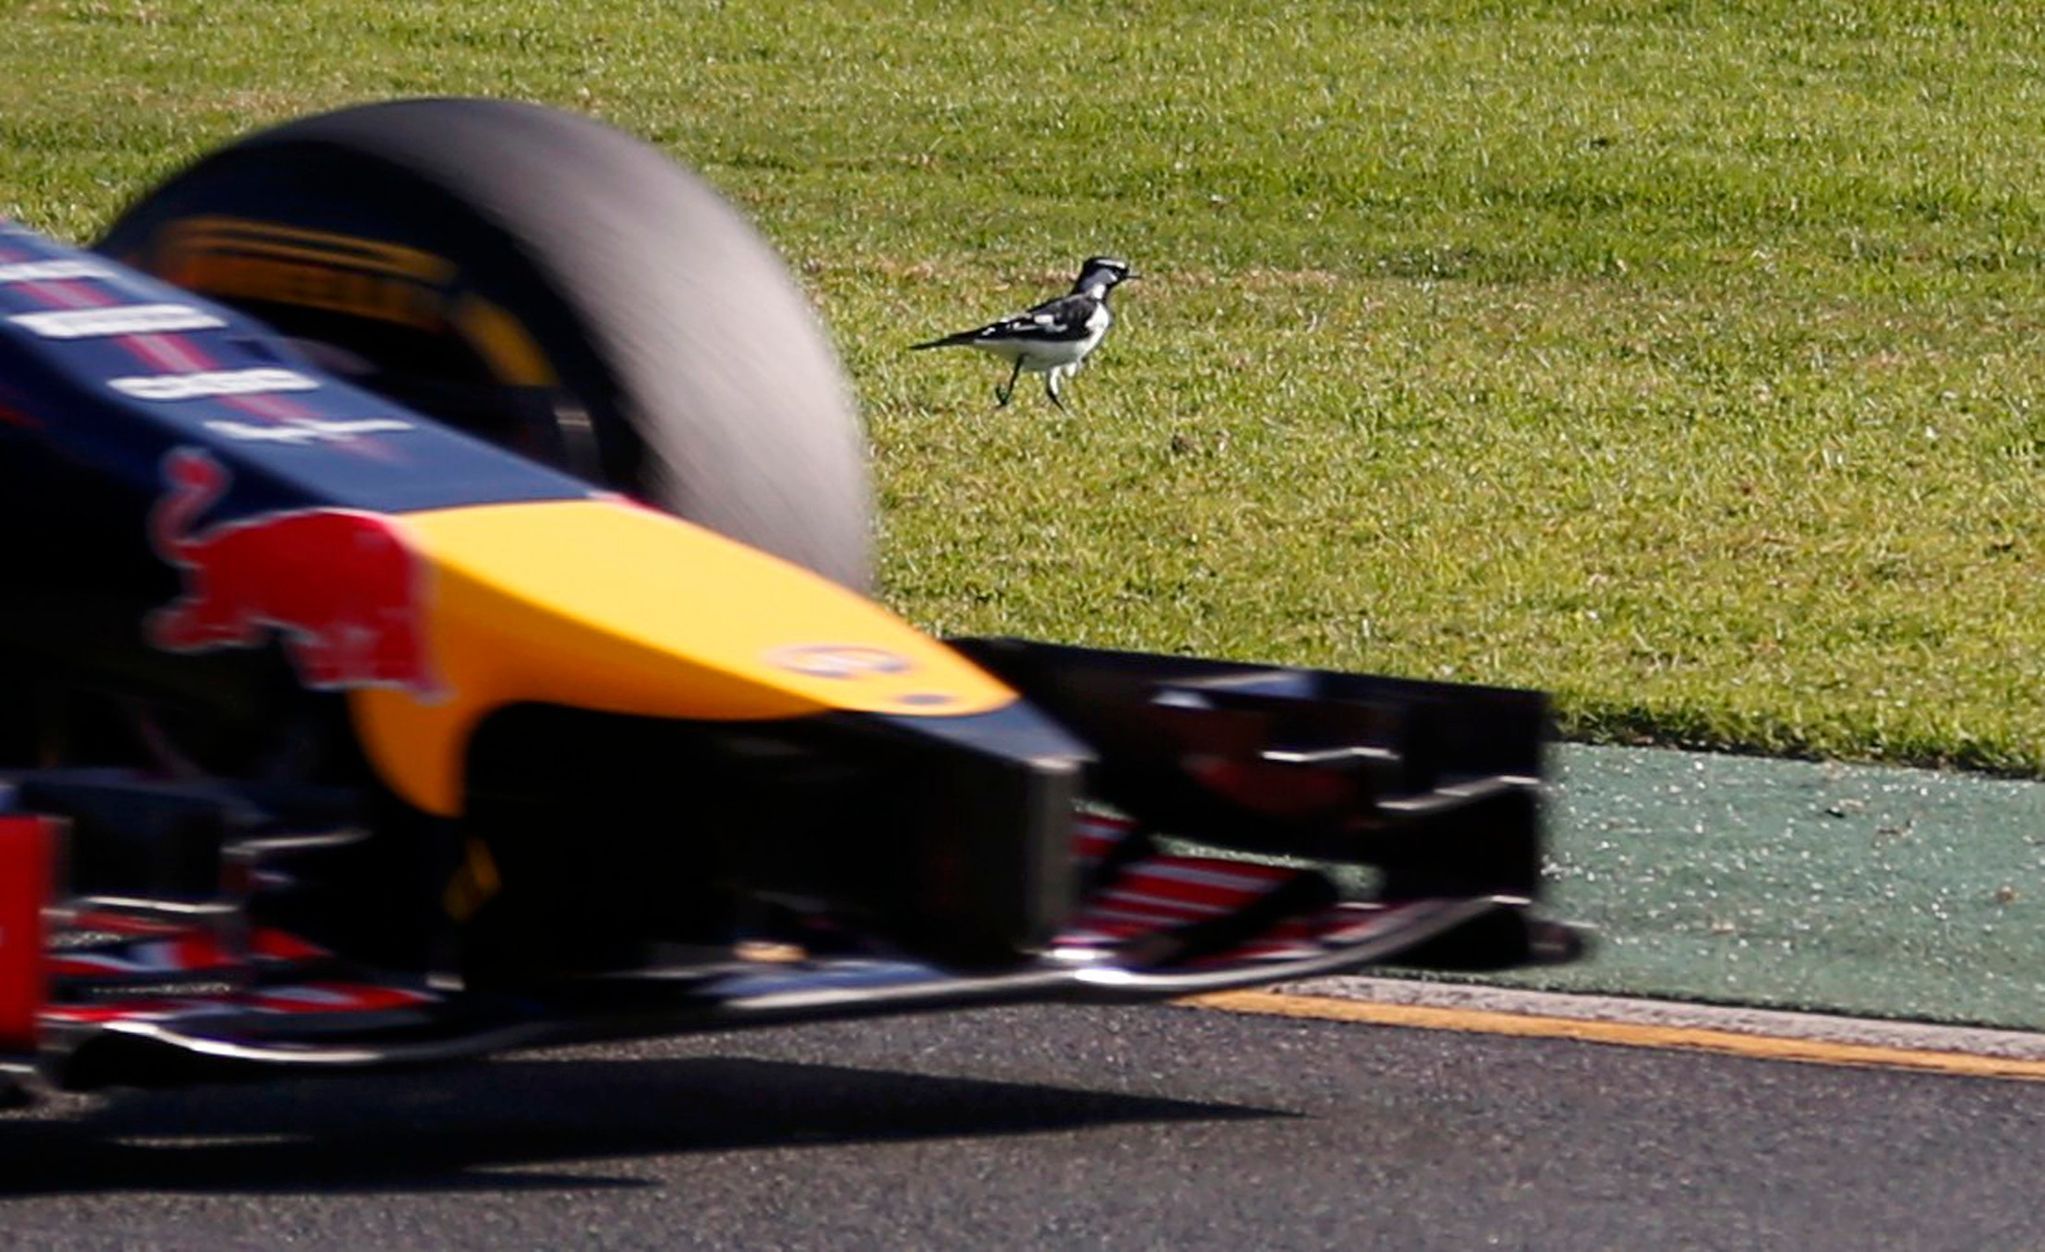 A bird stands next to the track as Red Bull Formula One driver Vettel of Germany drives past it during the second practice session of the Australian F1 Grand Prix in Melbourne